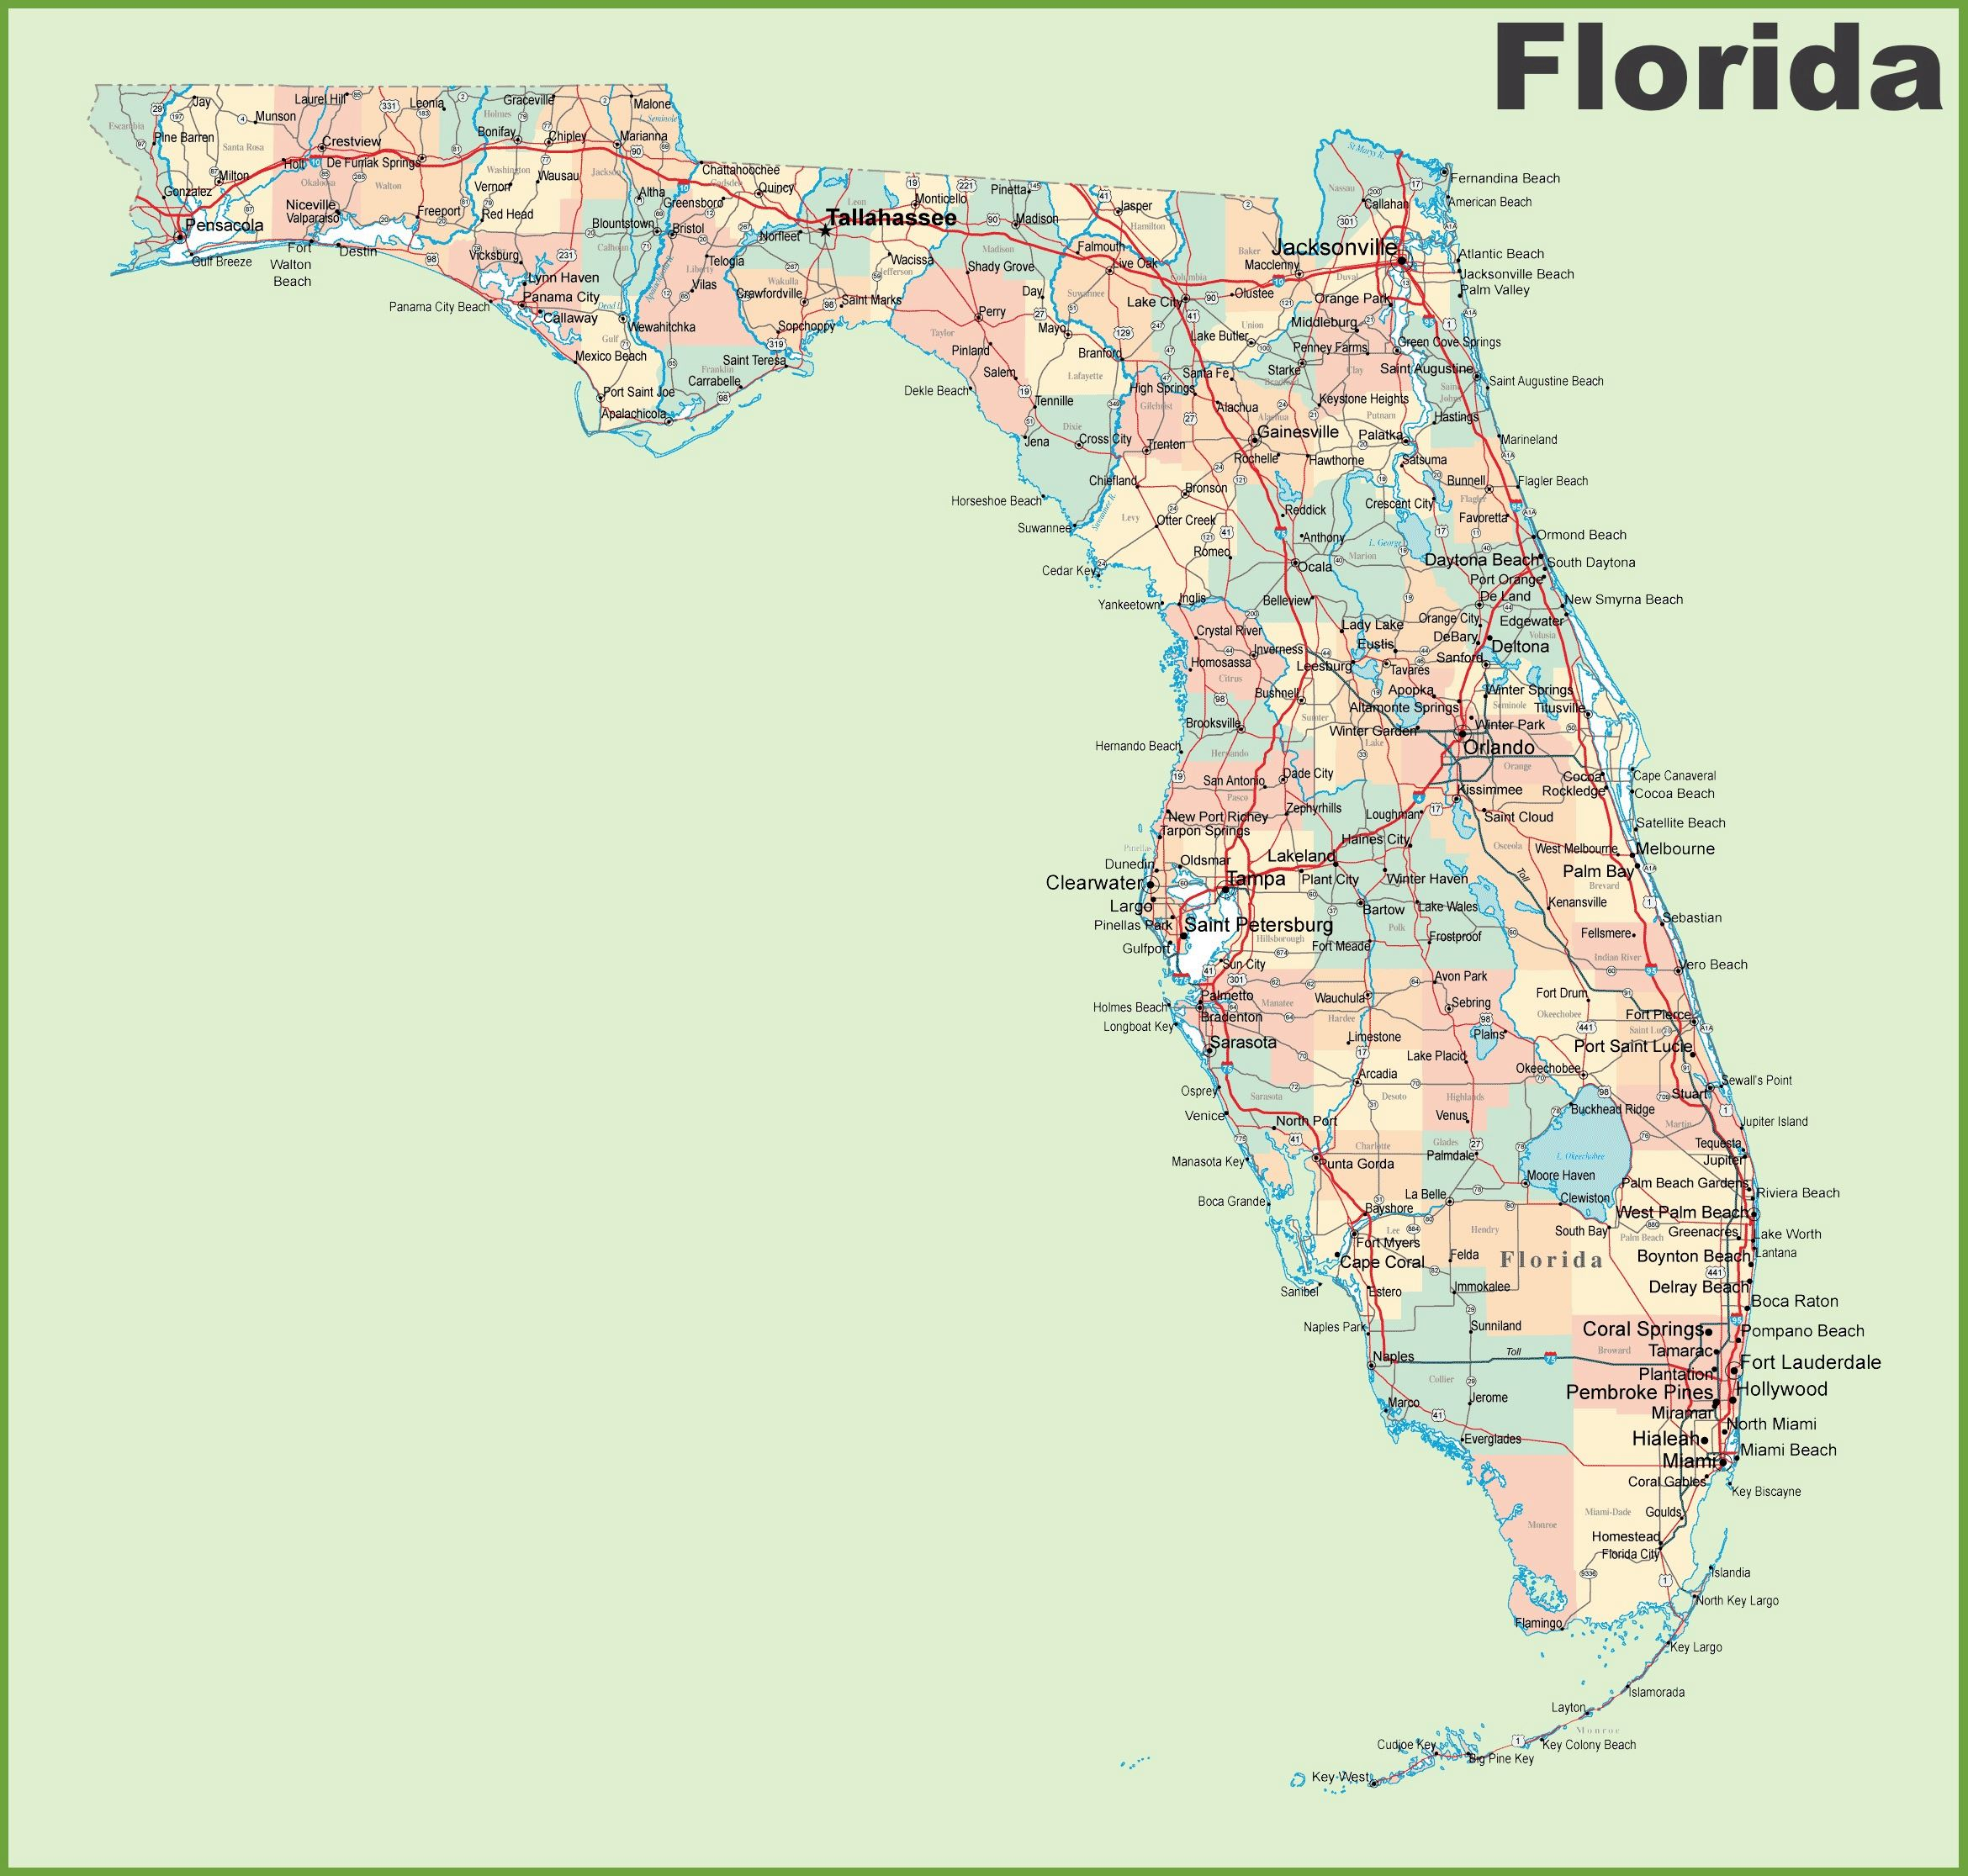 Large Florida Maps For Free Download And Print | High-Resolution And - Map Of Florida Gulf Coast Beach Towns